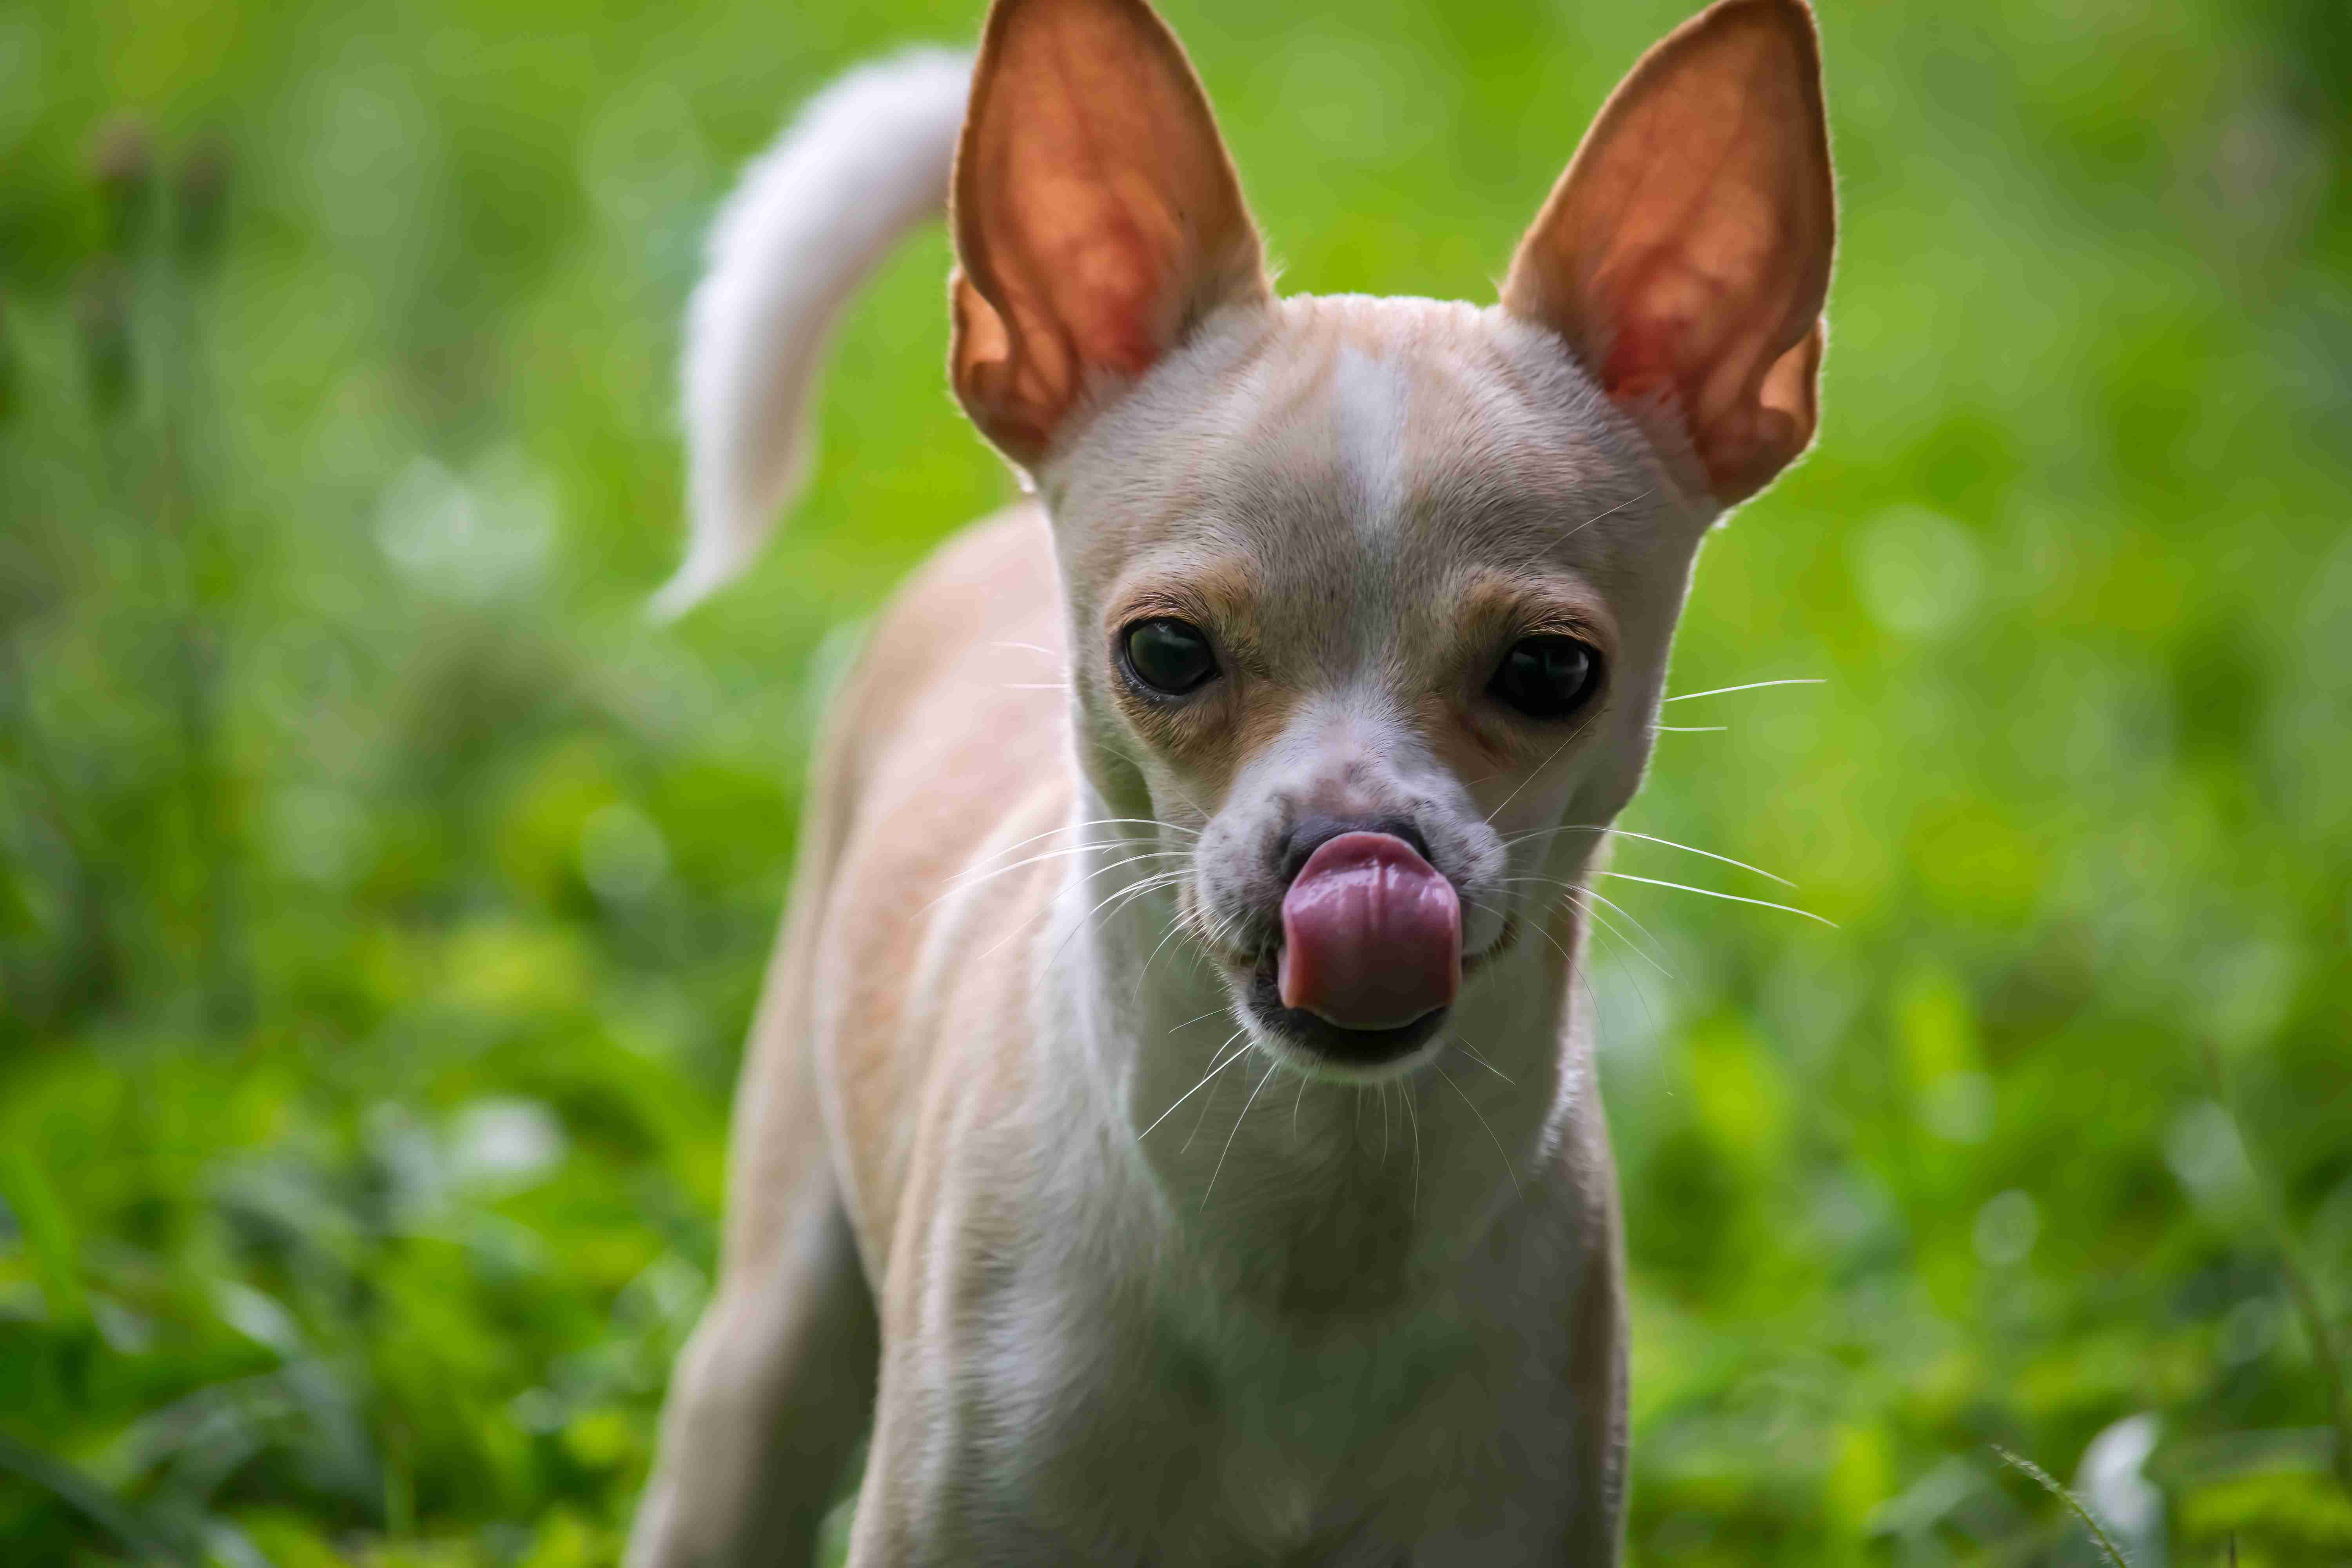 Is there a difference between aggression and playfulness in Chihuahuas?